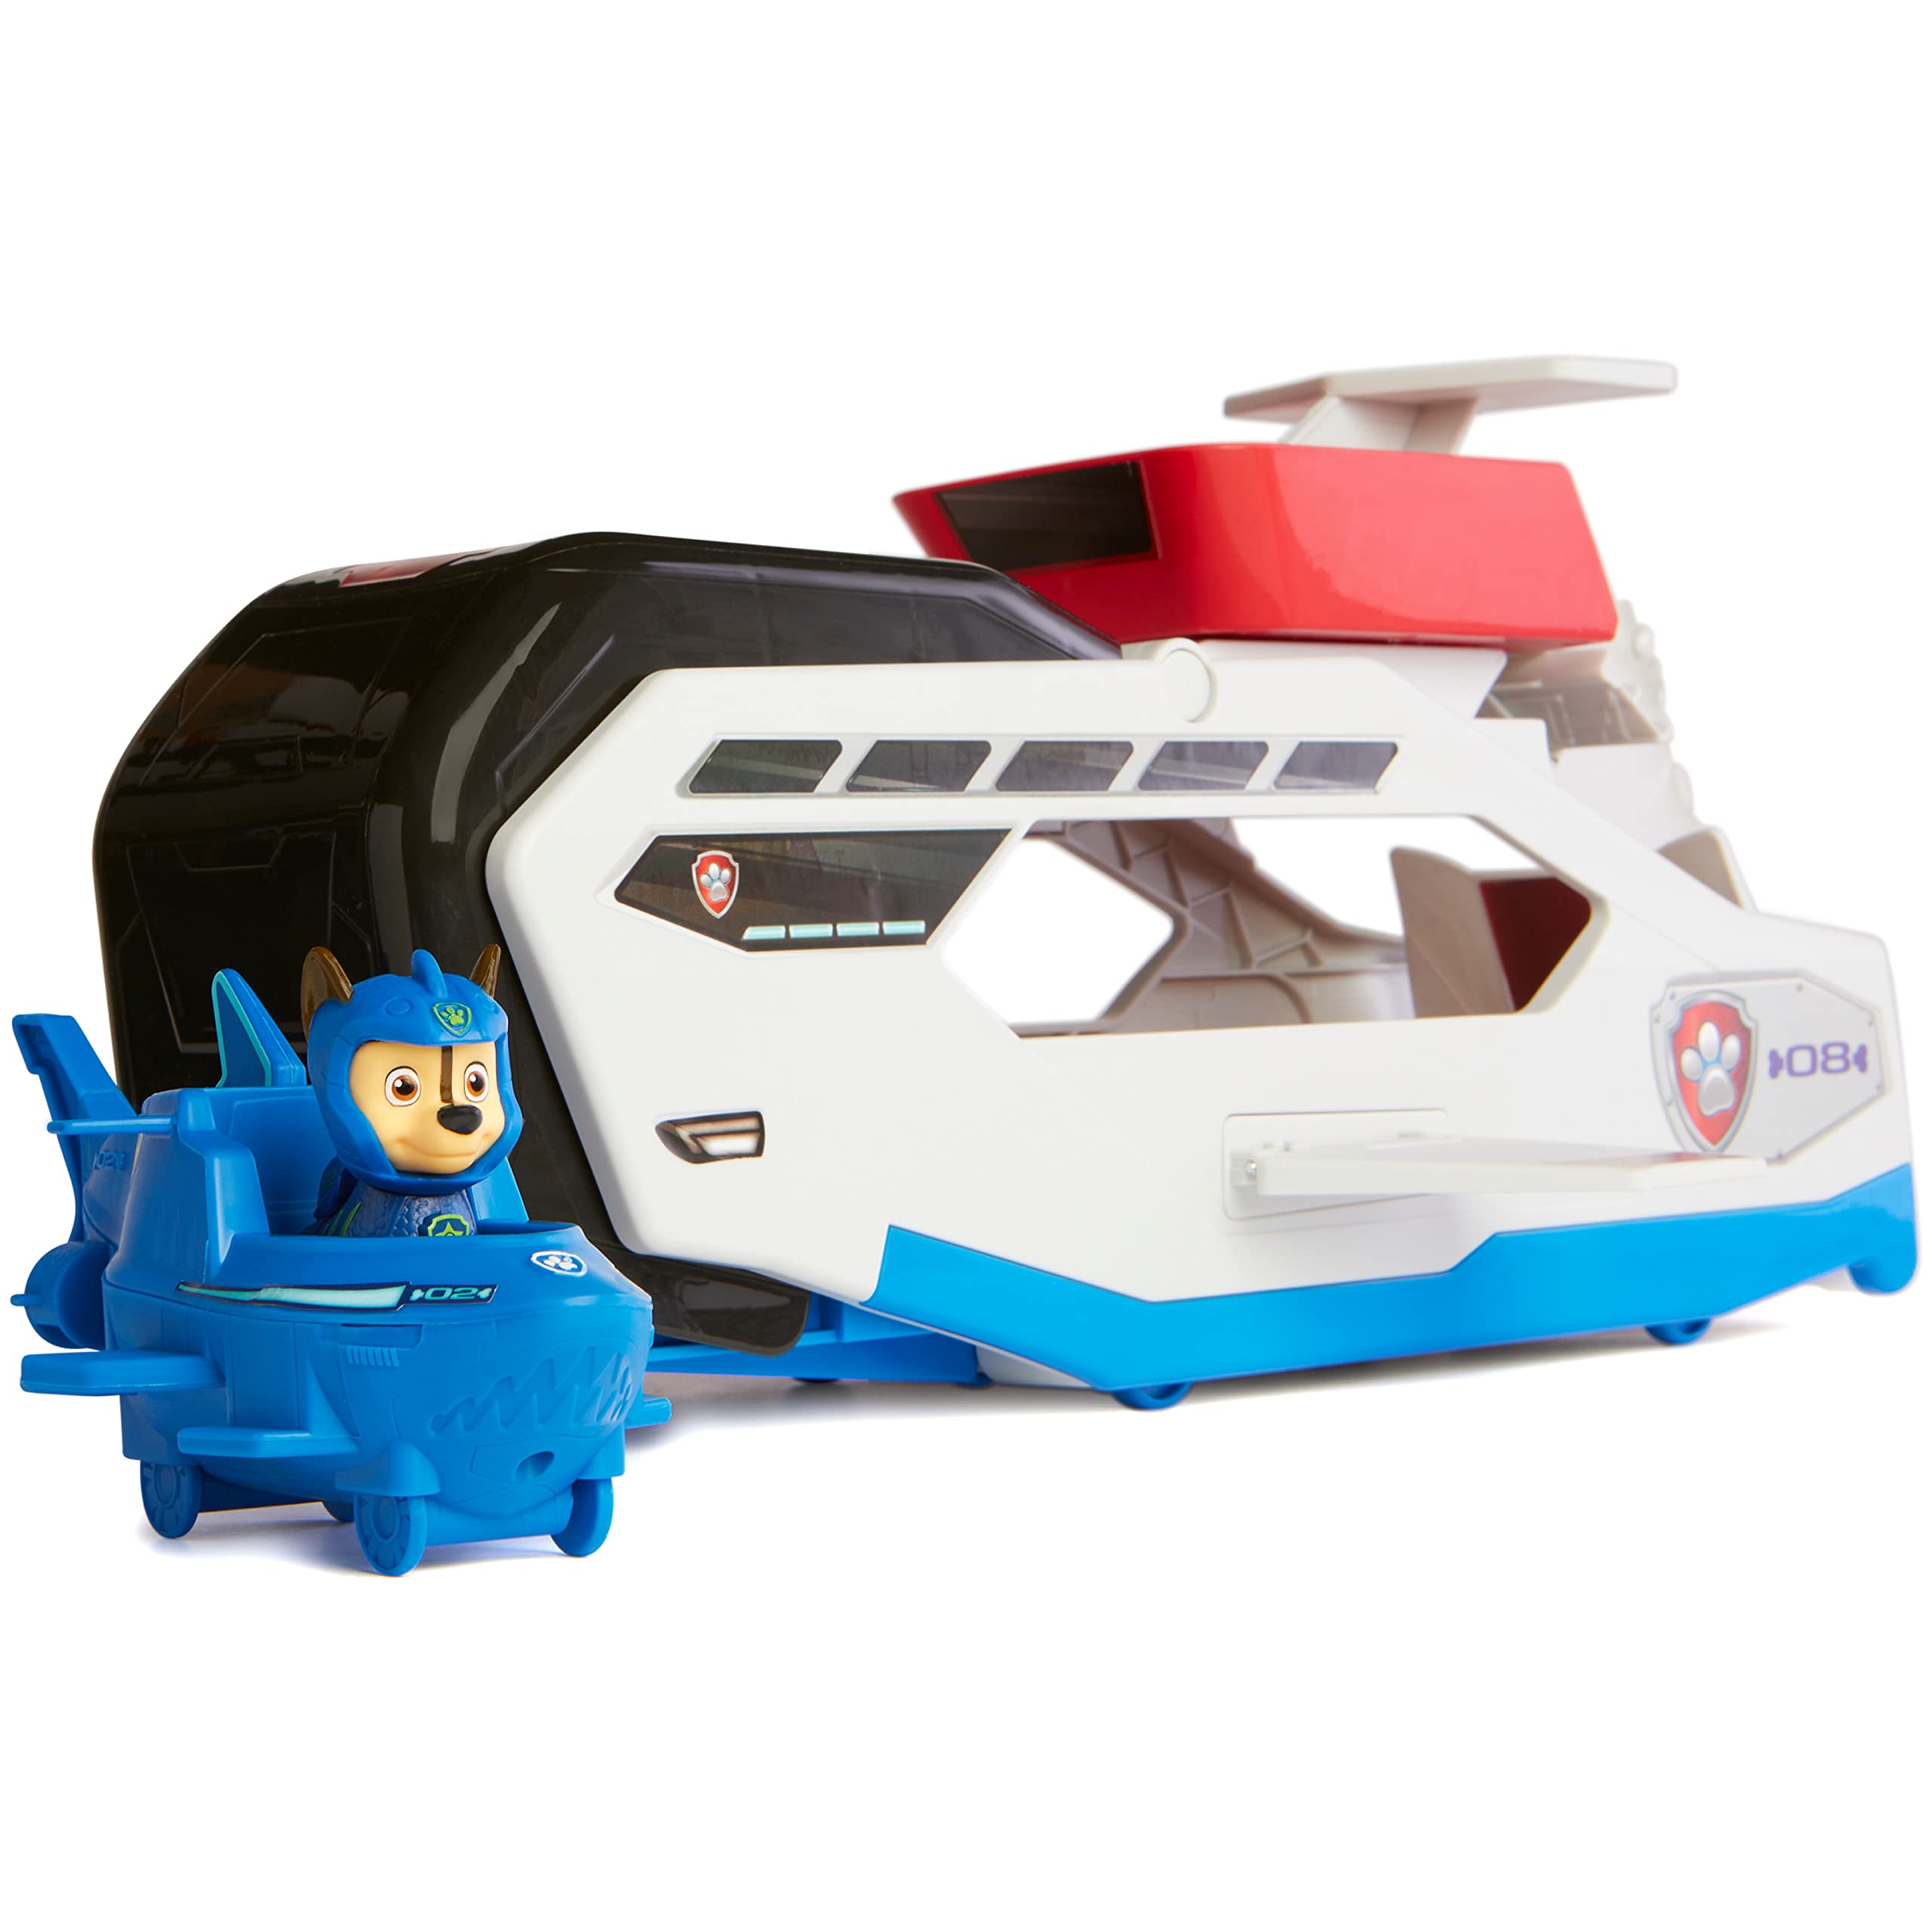 Paw Patrol Aqua Pups Whale Patroller Team Vehicle with Chase Action Figure, Toy Car and Vehicle Launcher, Kids Toys for Ages 3 and up